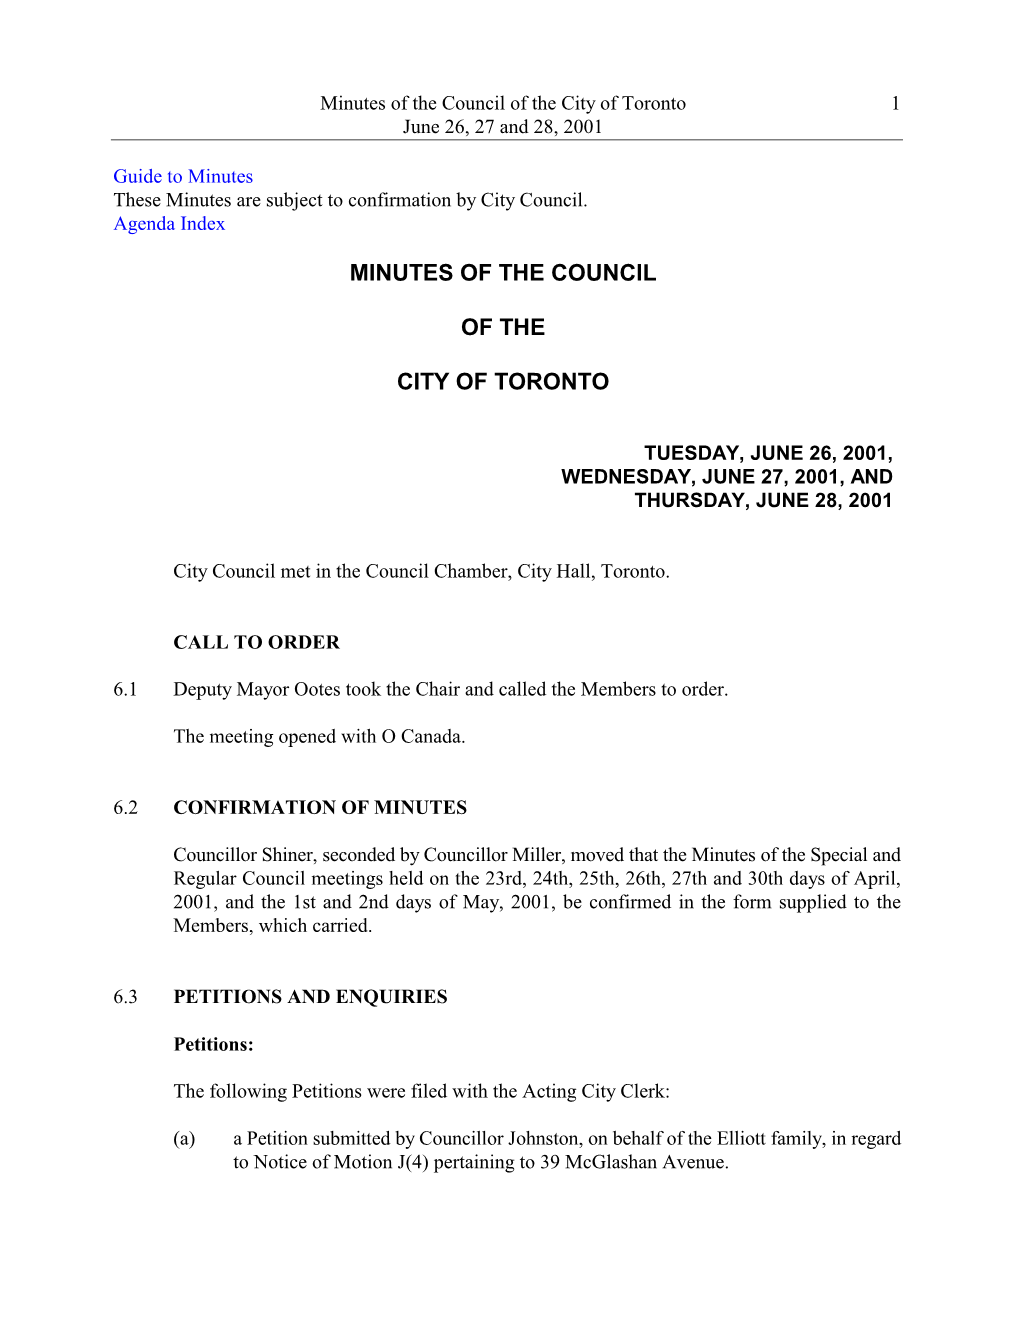 Minutes of the Council of the City of Toronto 1 June 26, 27 and 28, 2001